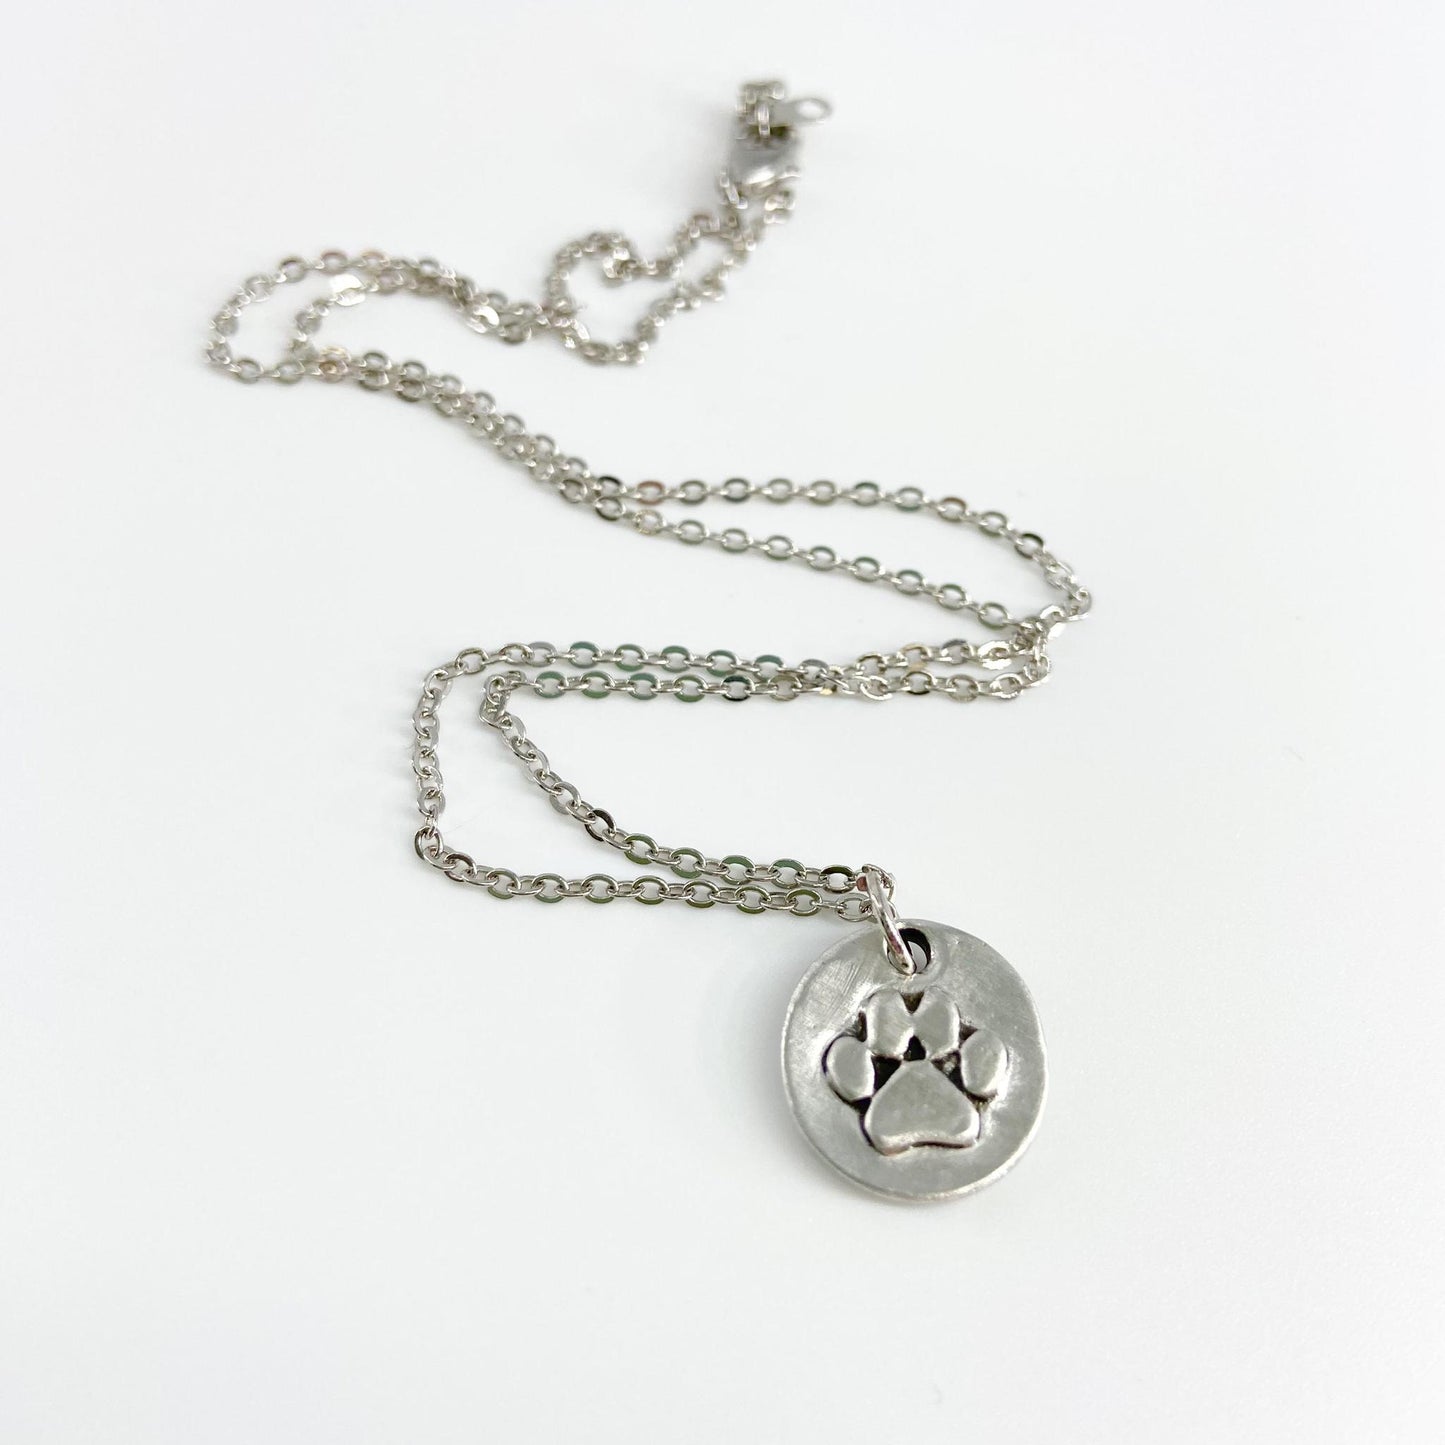 Necklace - Paw Print - Pewter